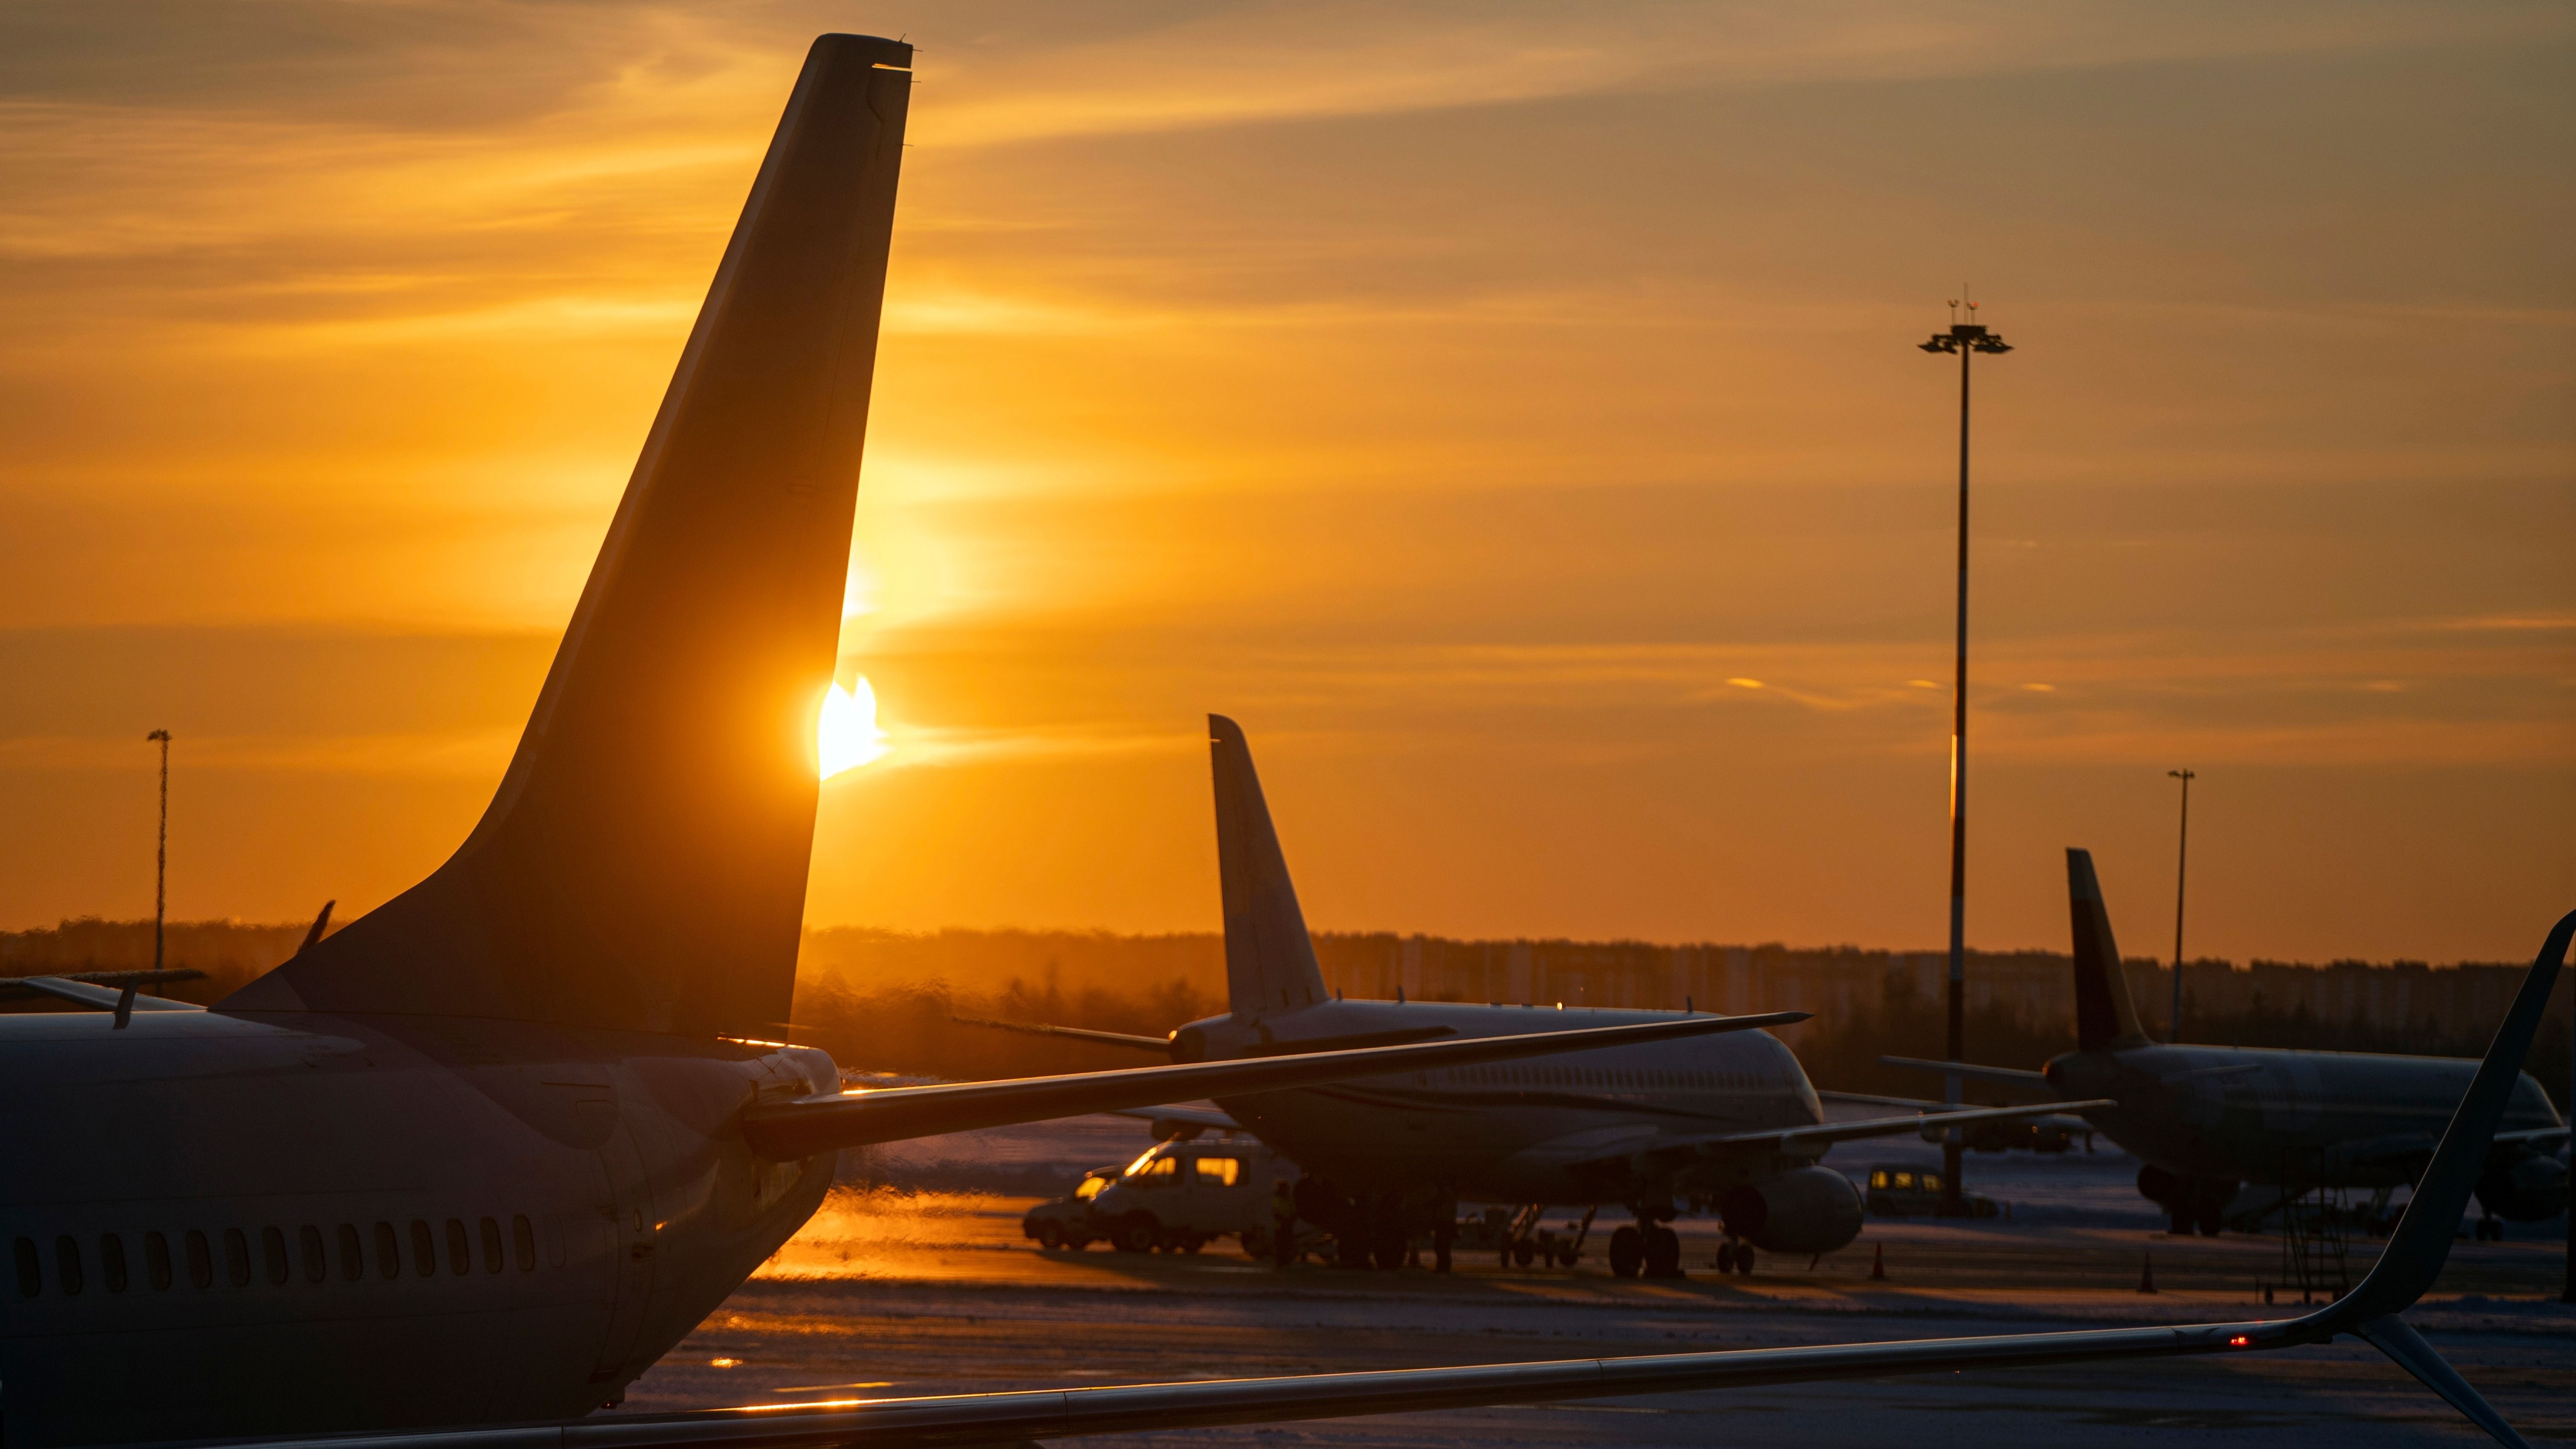 Silhouettes of the airplanes with Tails at airport during bright yellow sunset, concept picture about transport as background.